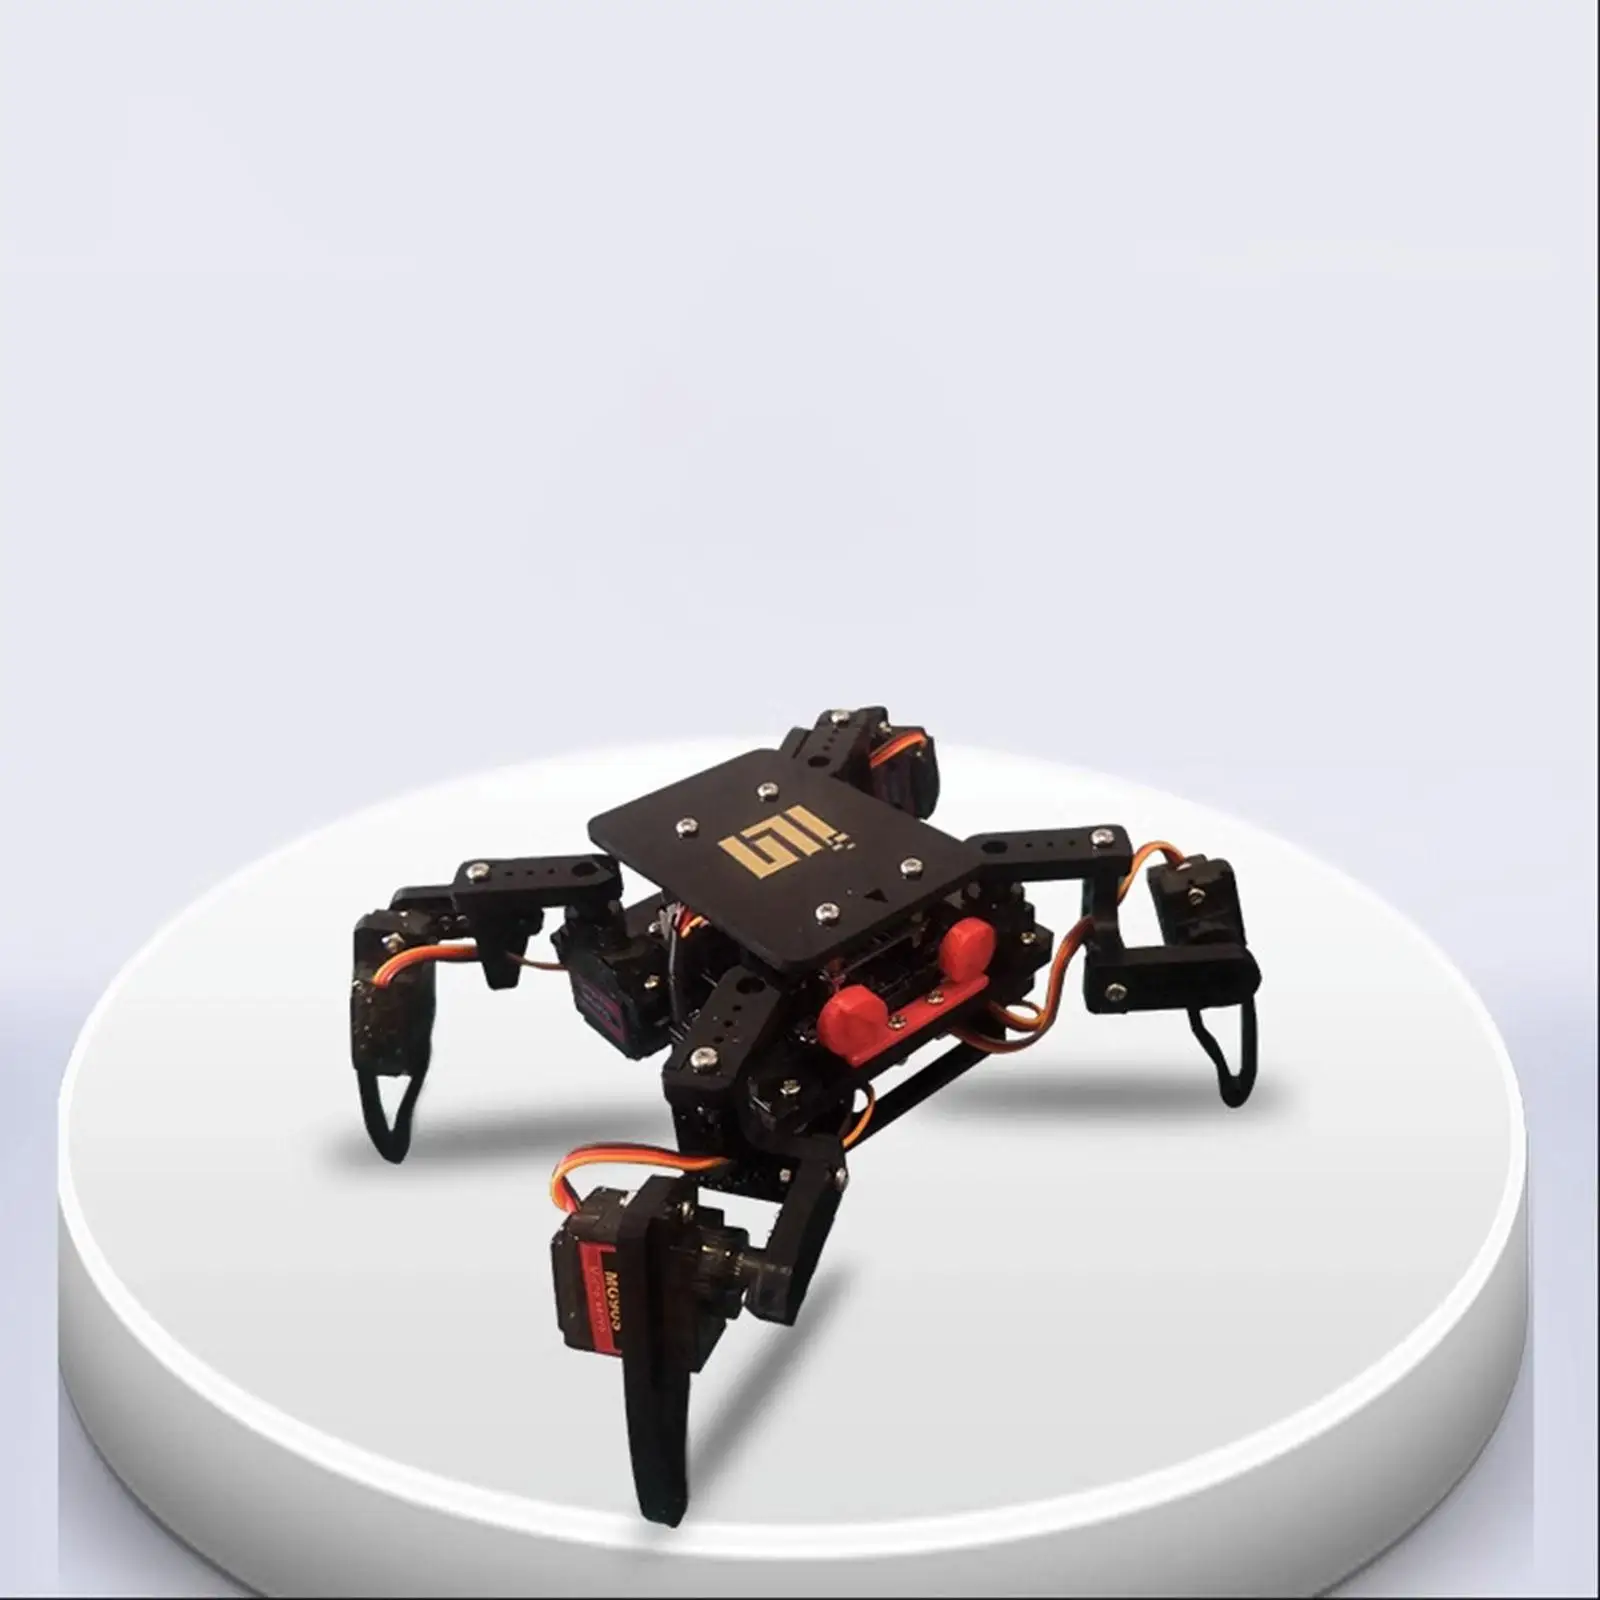 DIY Quadruped Robot Kits App Control Programming Robot Toy Project for Electronic Competition Kids to Learn Program Teens Adults